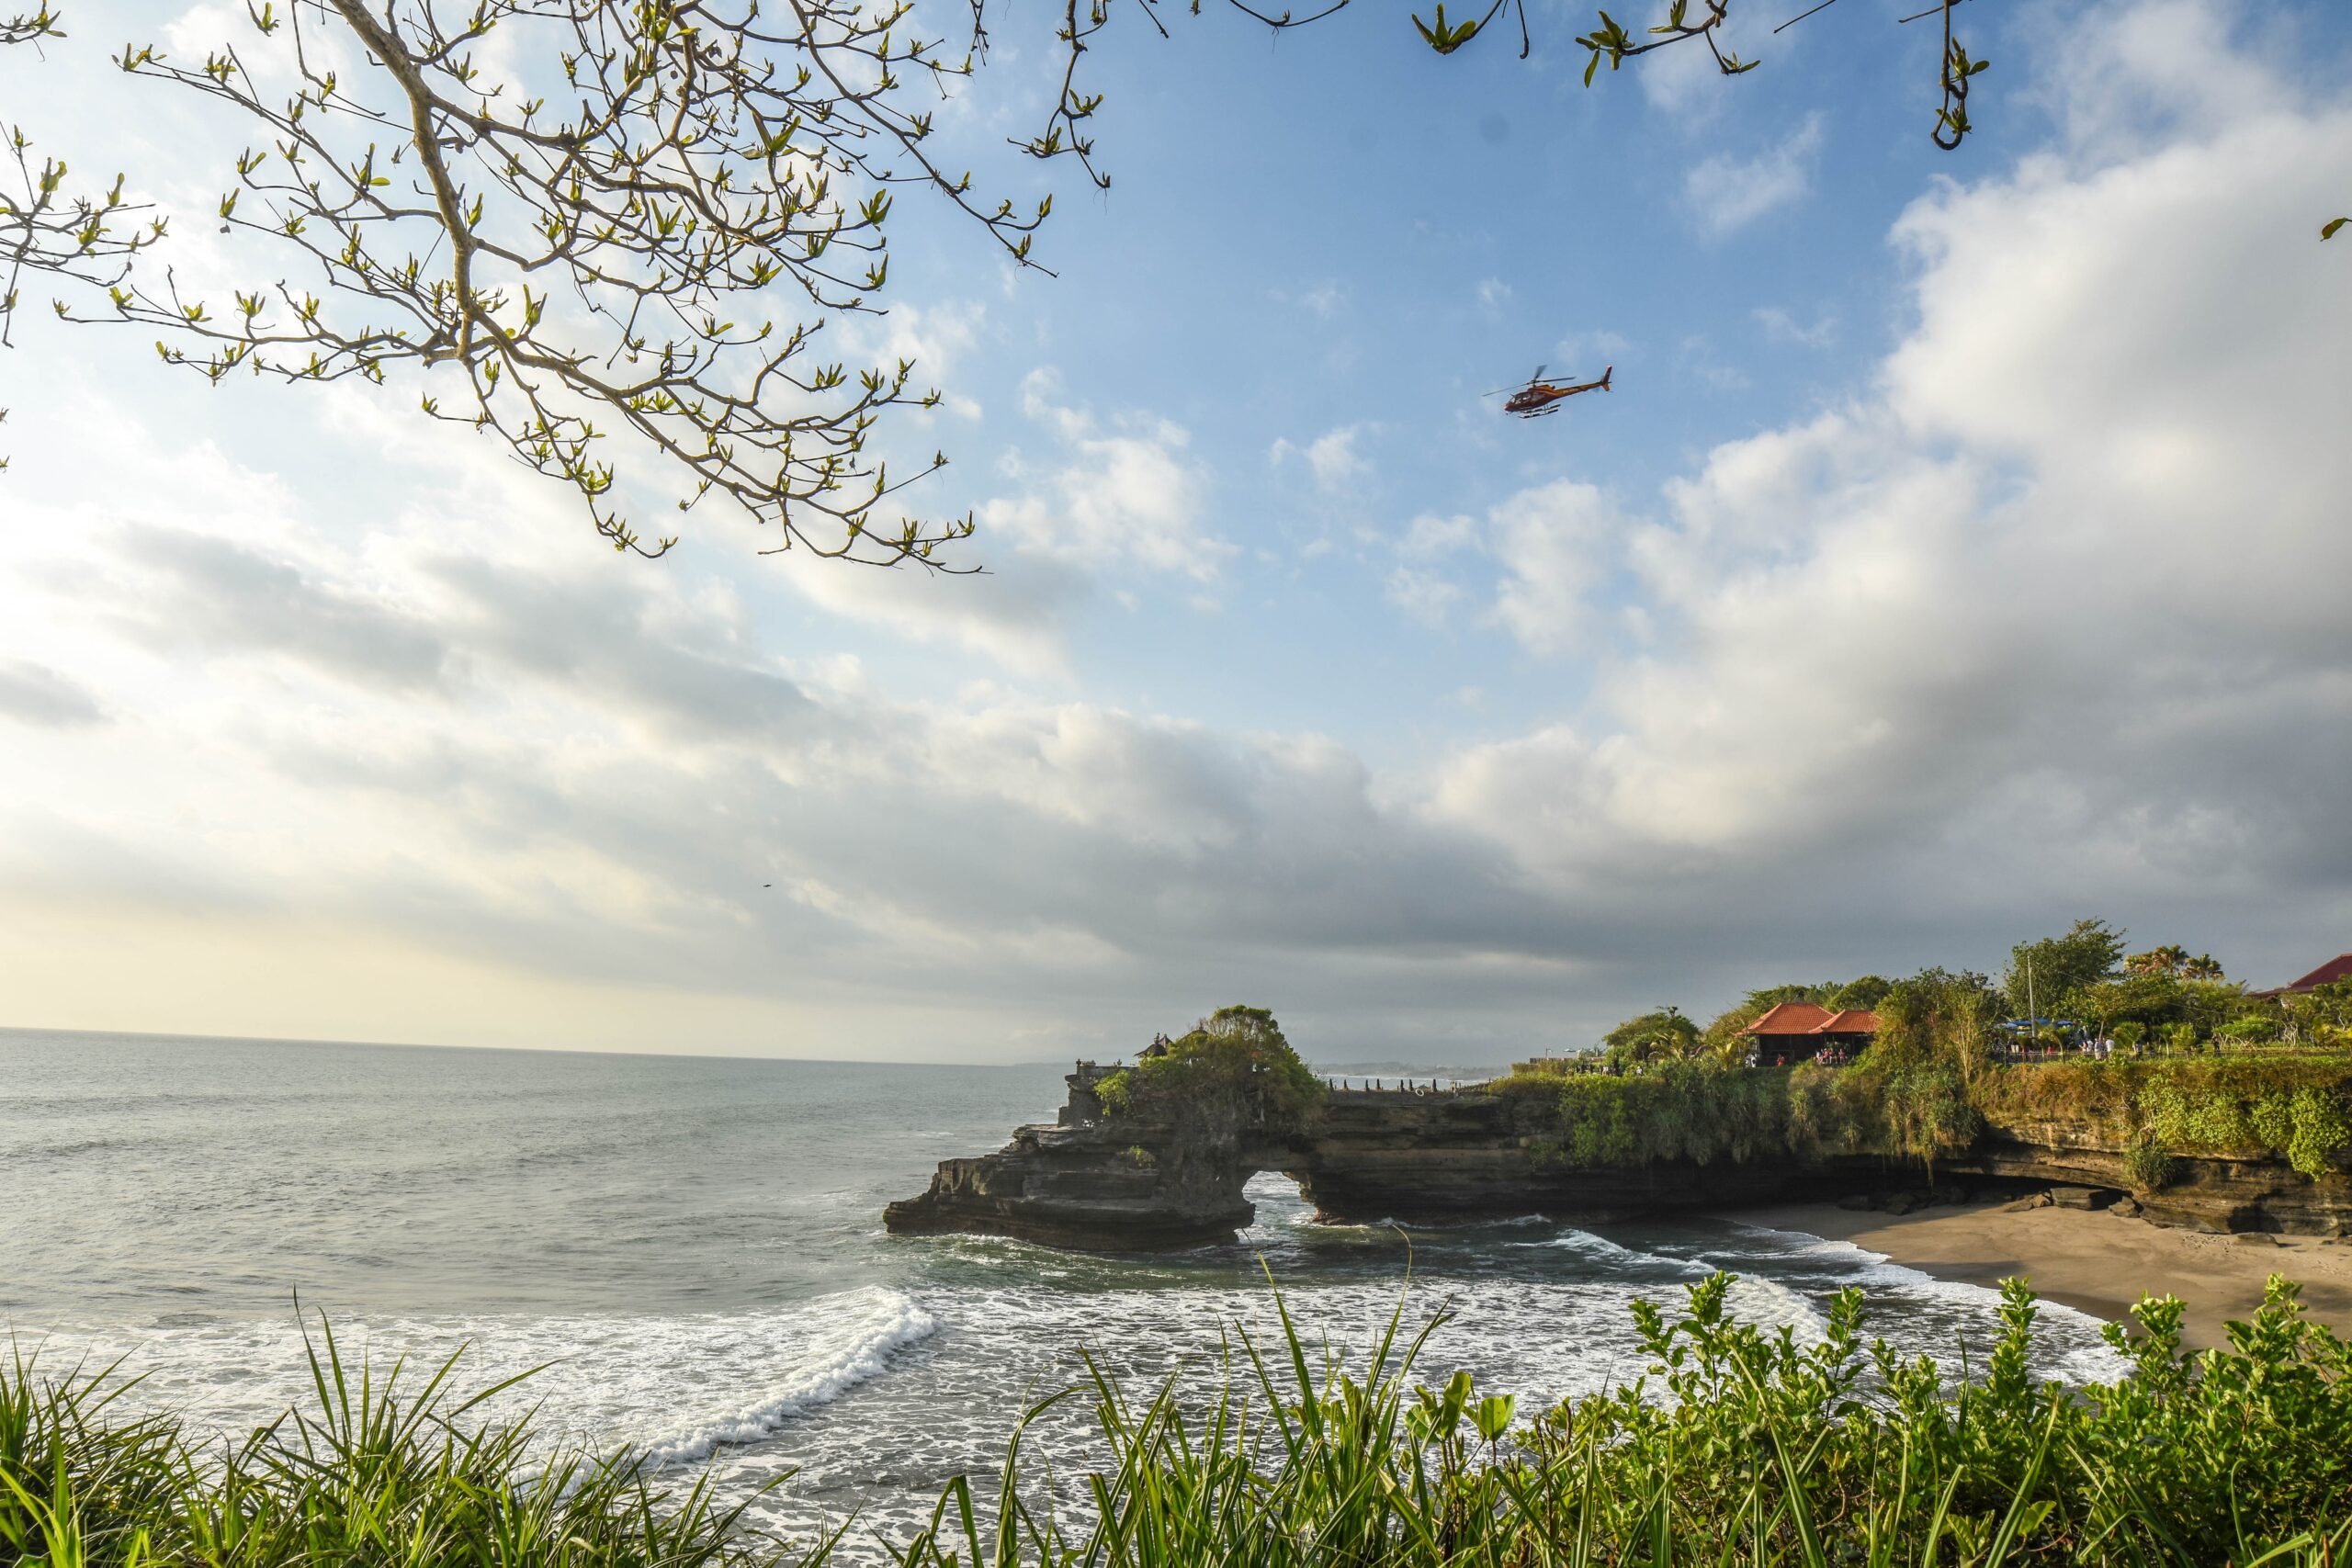 The Best Hotels In Bali, Indonesia. Where To Stay In Bali?